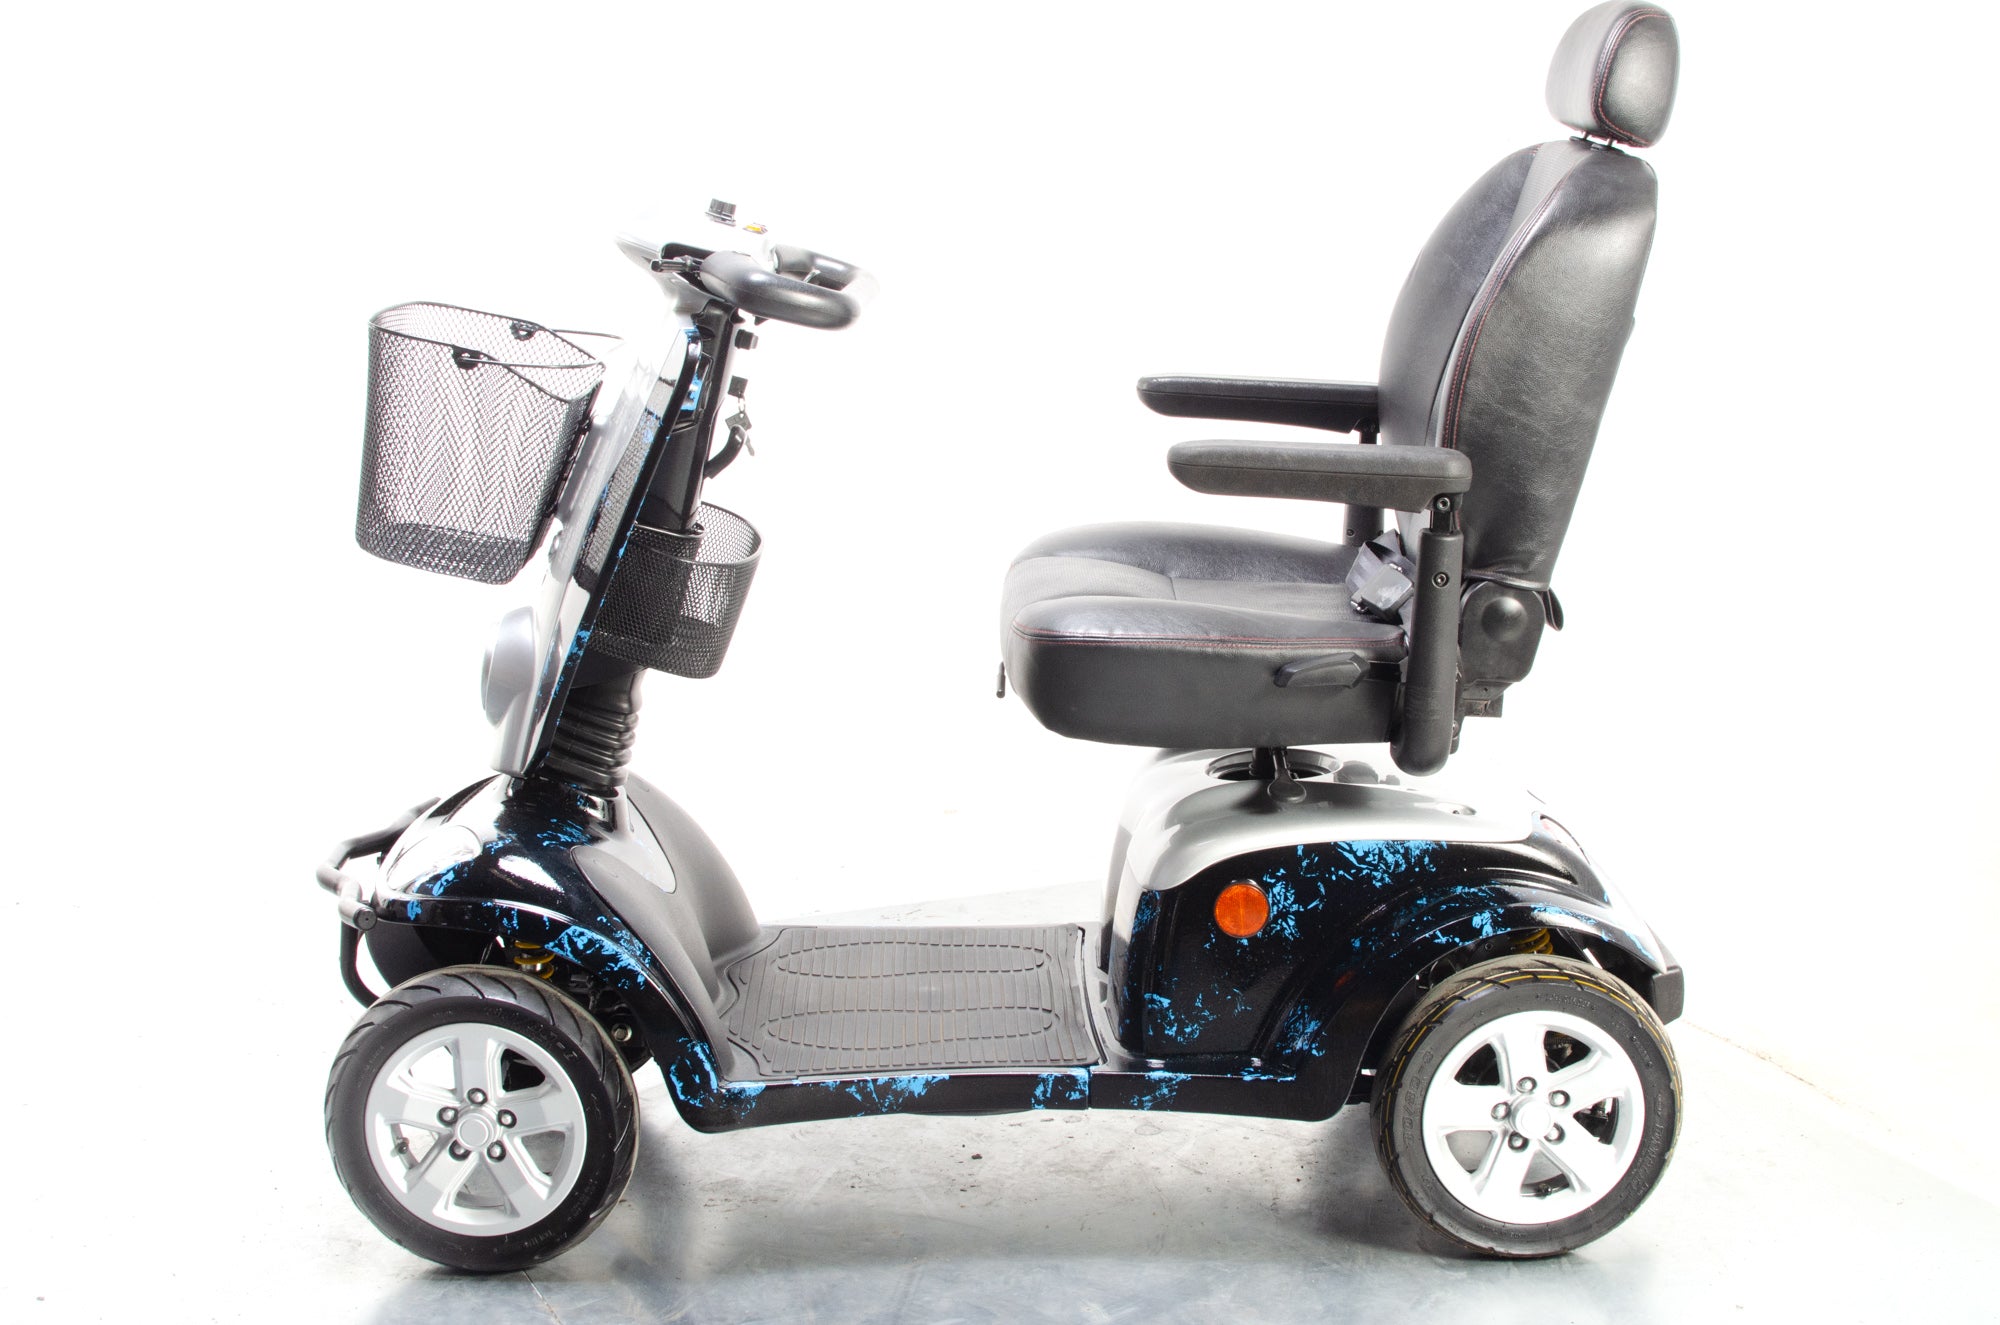 Kymco Maxi XLS Large Comfy Electric Mobility Scooter